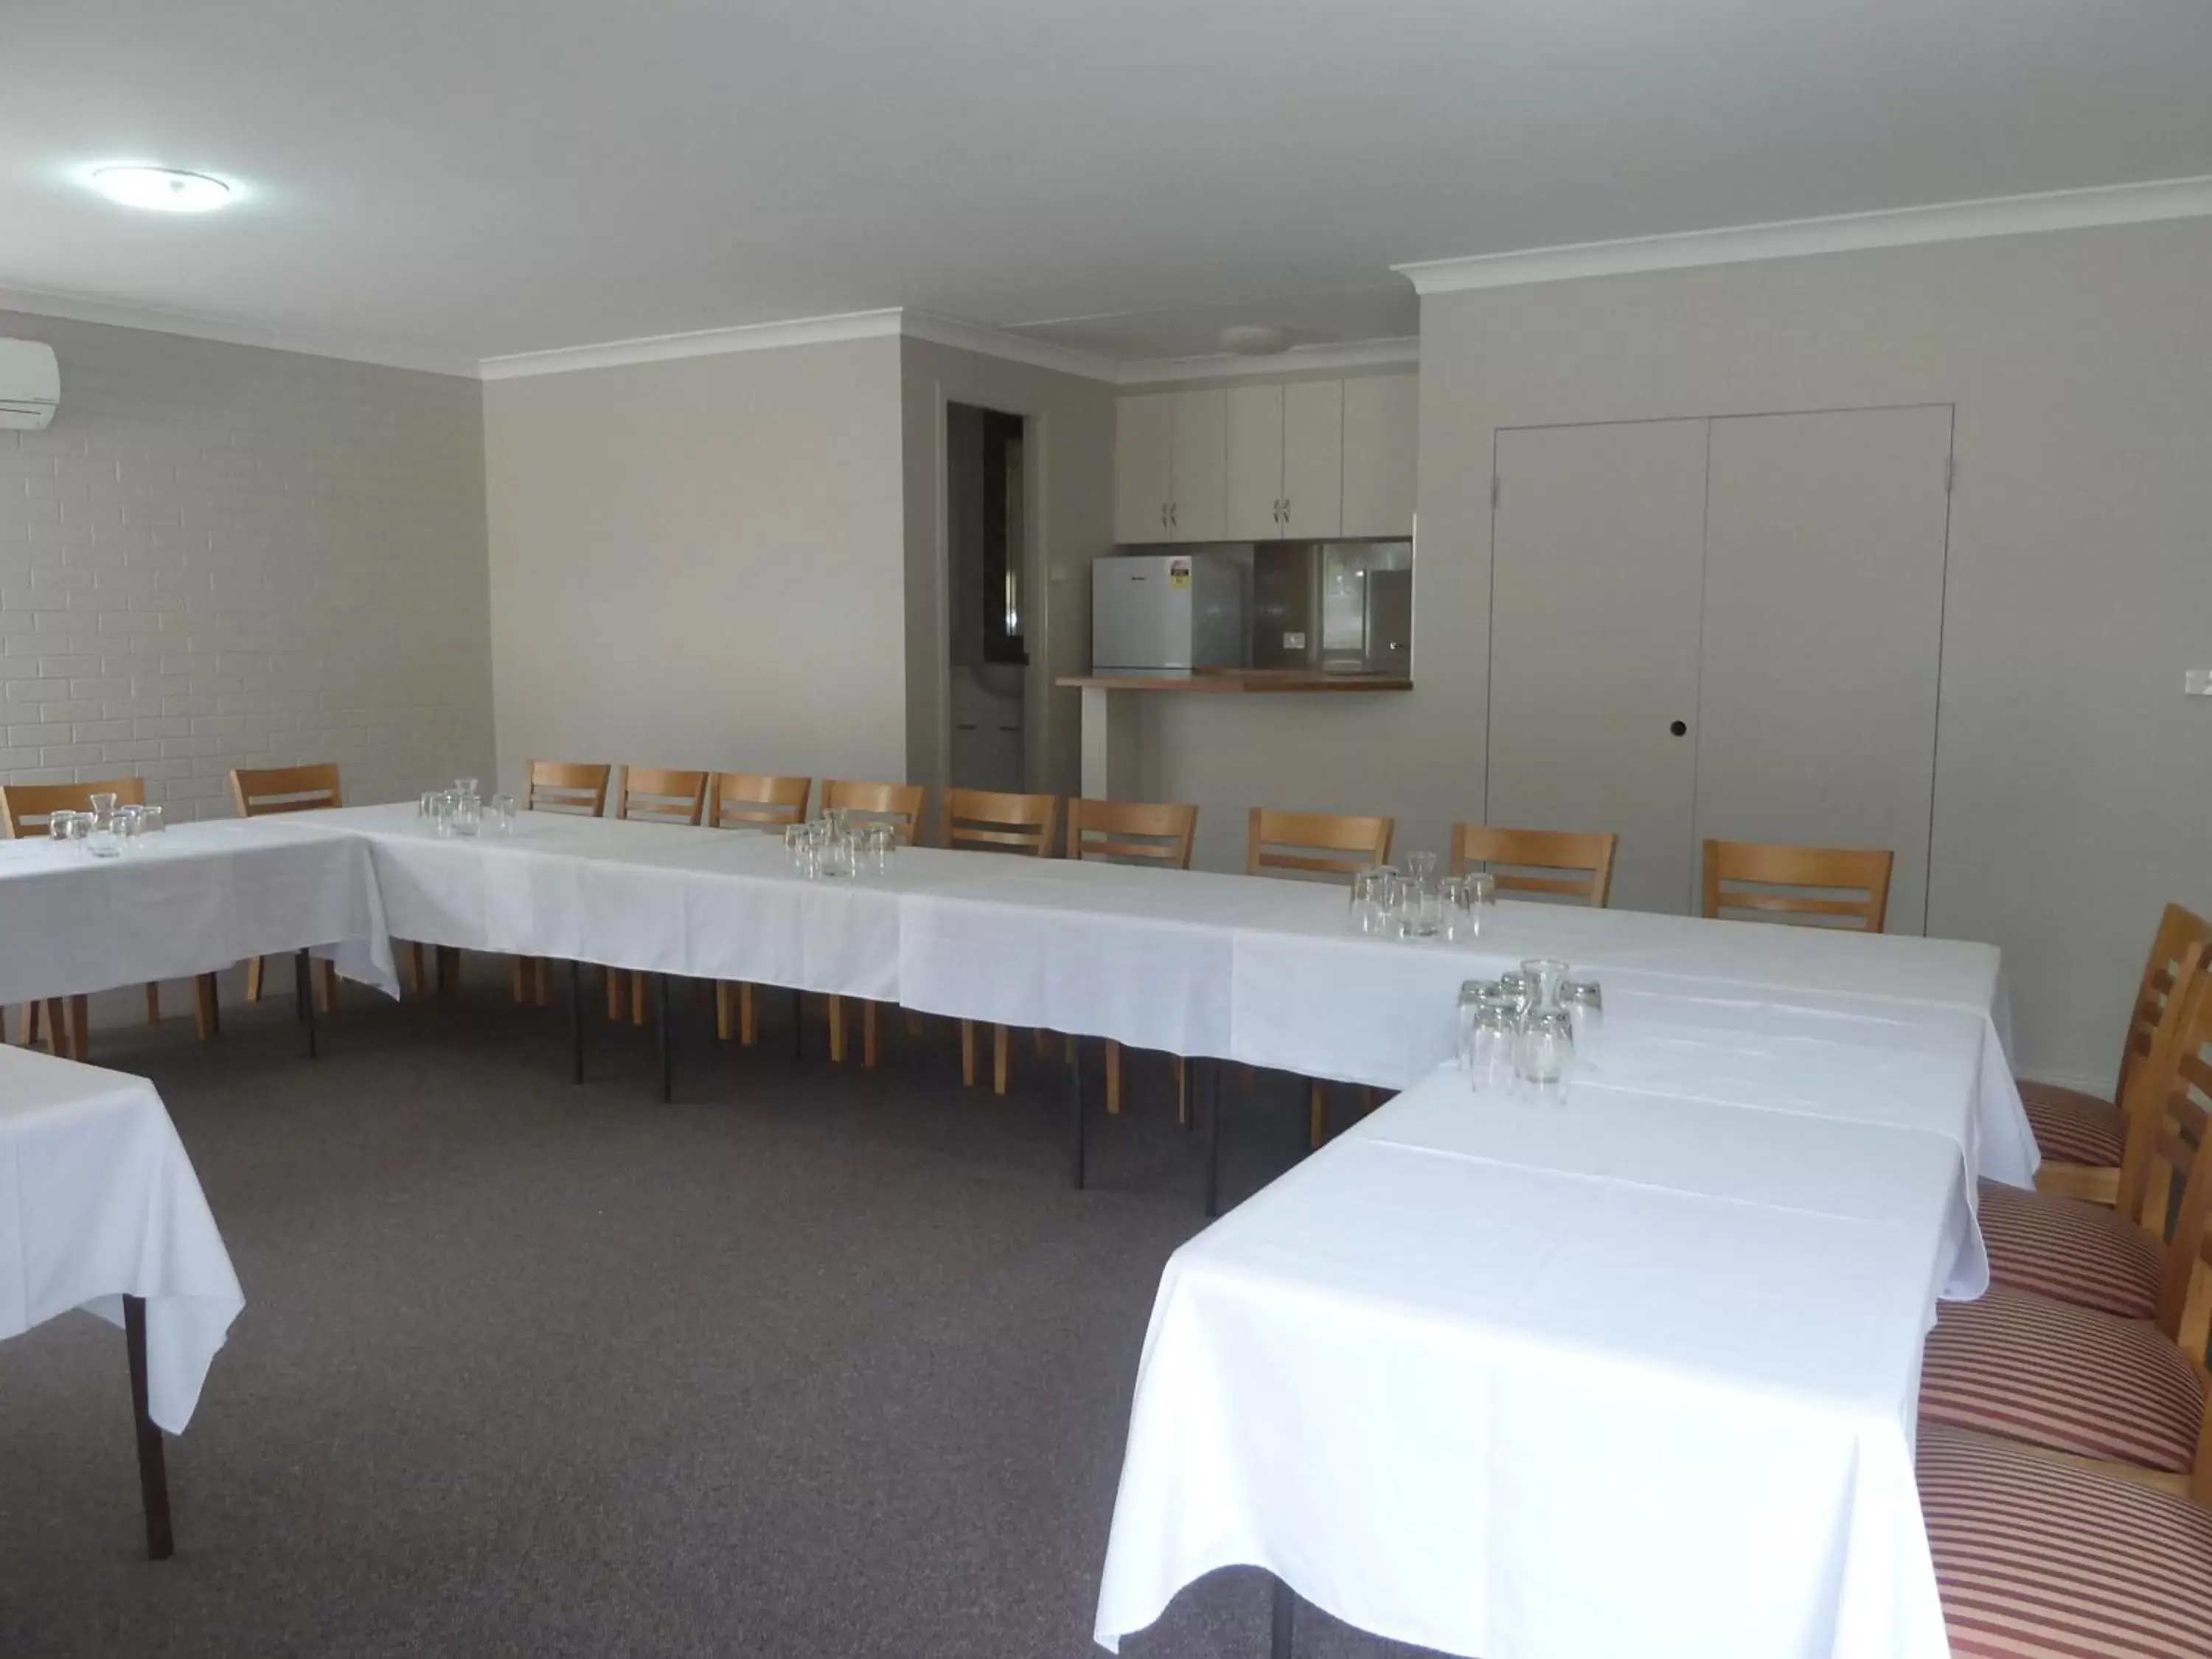 Meeting/conference room in McNevins Tamworth Motel